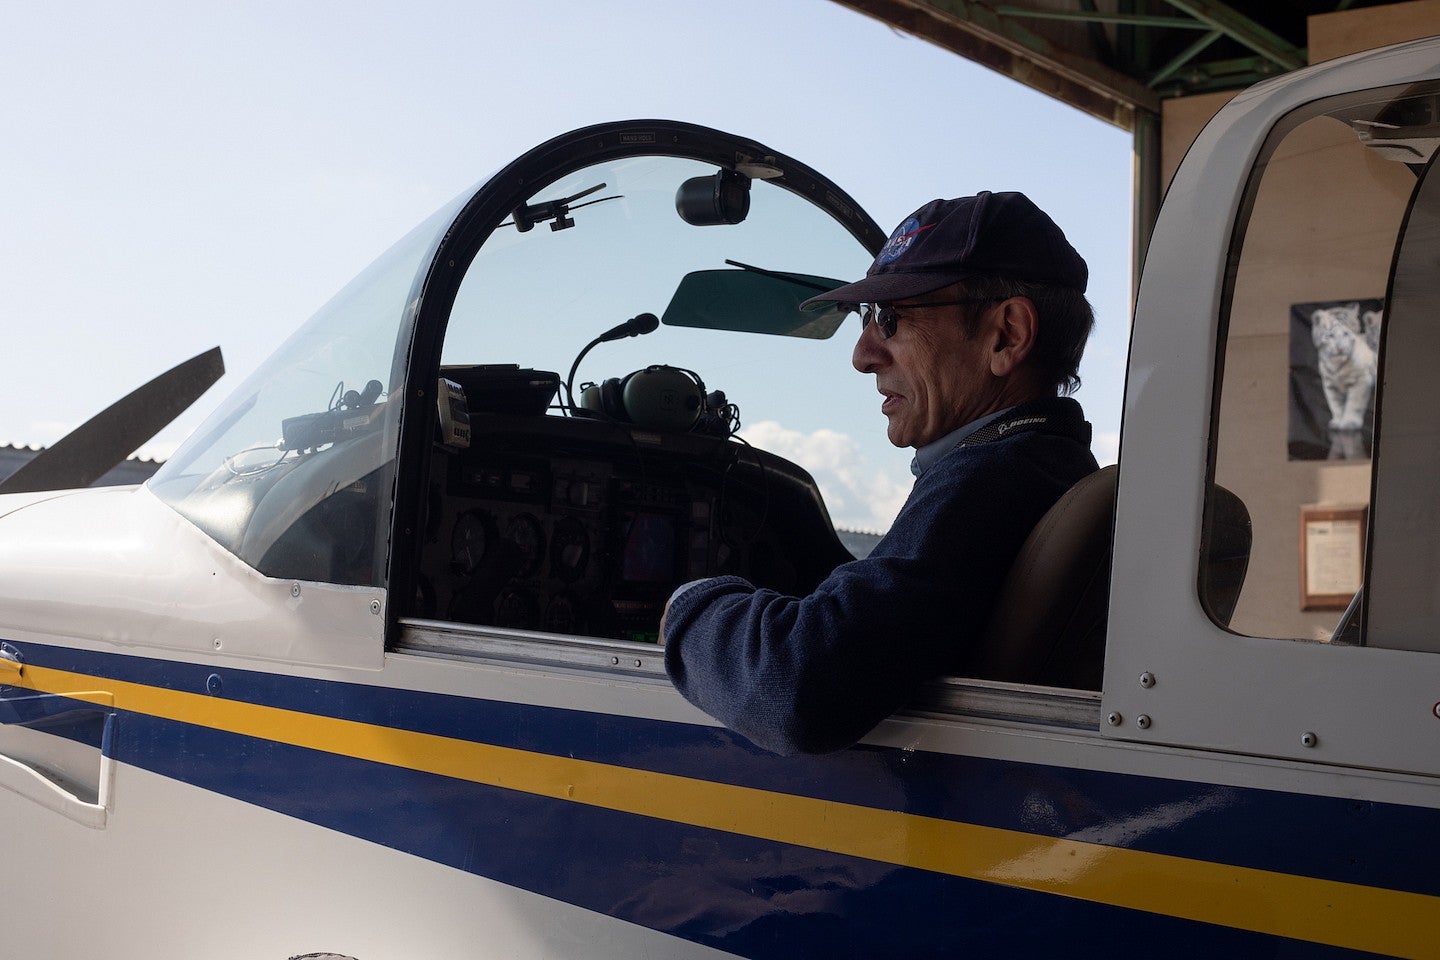 robert mauro in the cockpit of his small plane as he pulls out of the hangar